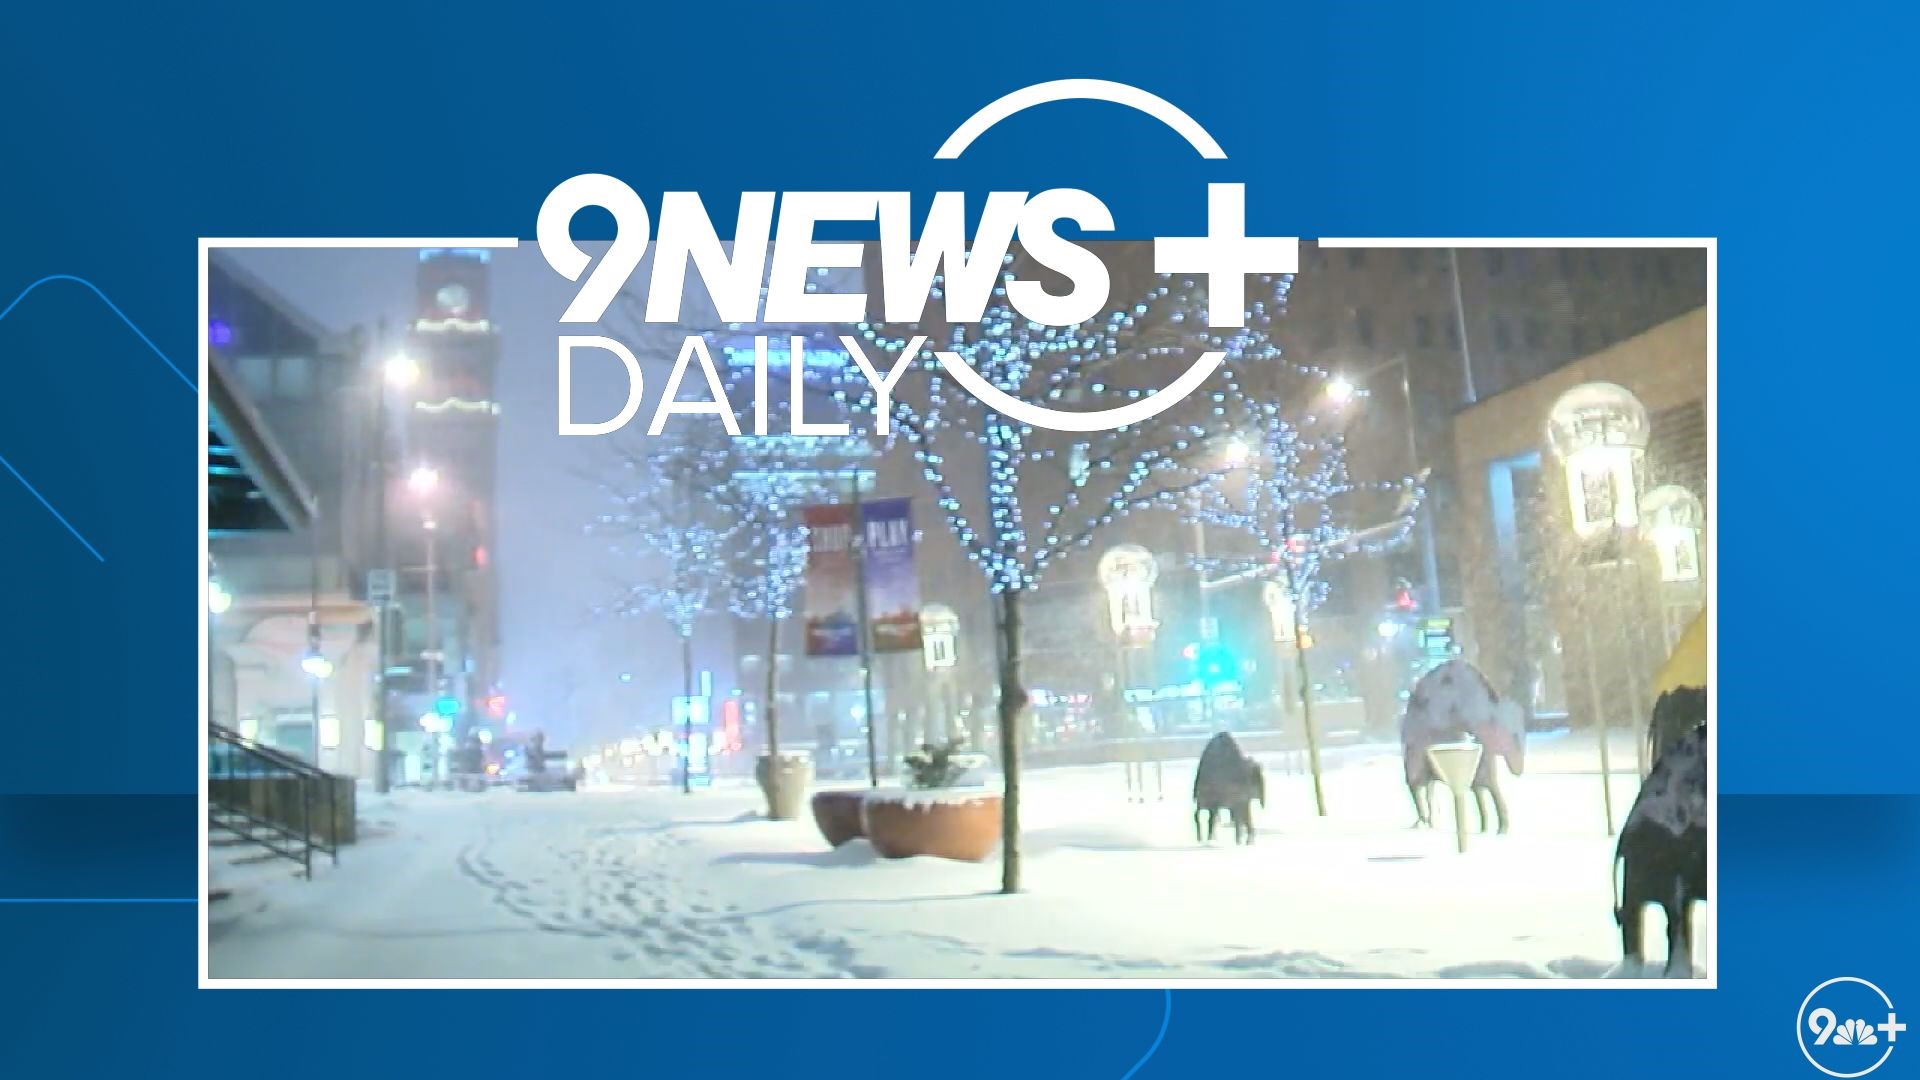 Meteorologist Chris Bianchi breaks down the chances for a white Christmas in Colorado this year.